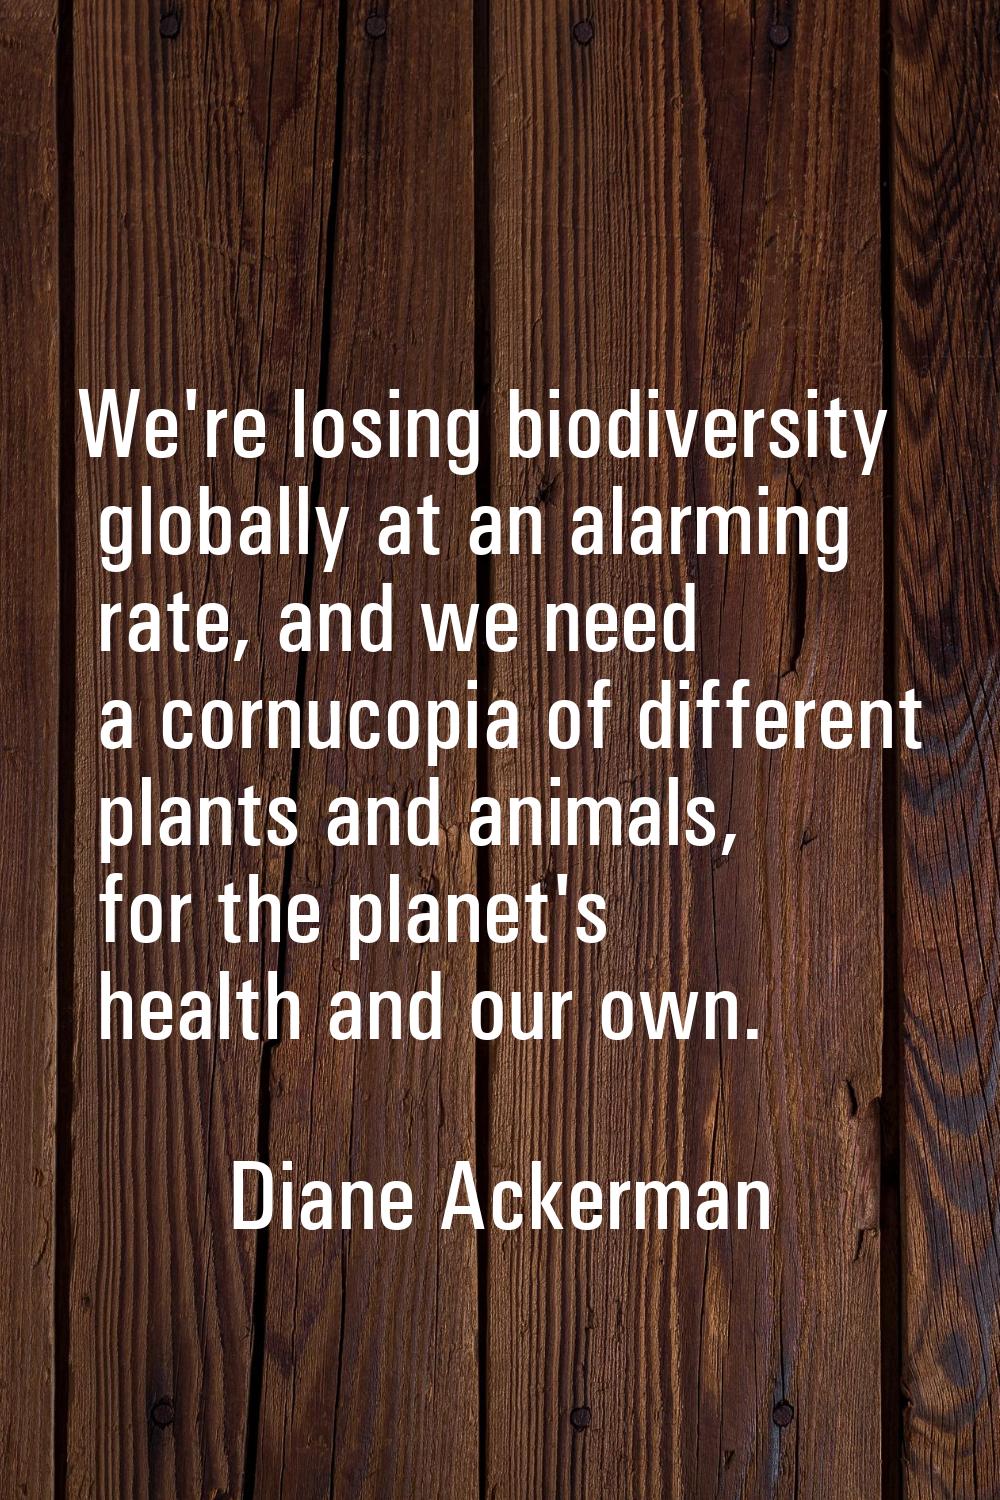 We're losing biodiversity globally at an alarming rate, and we need a cornucopia of different plant